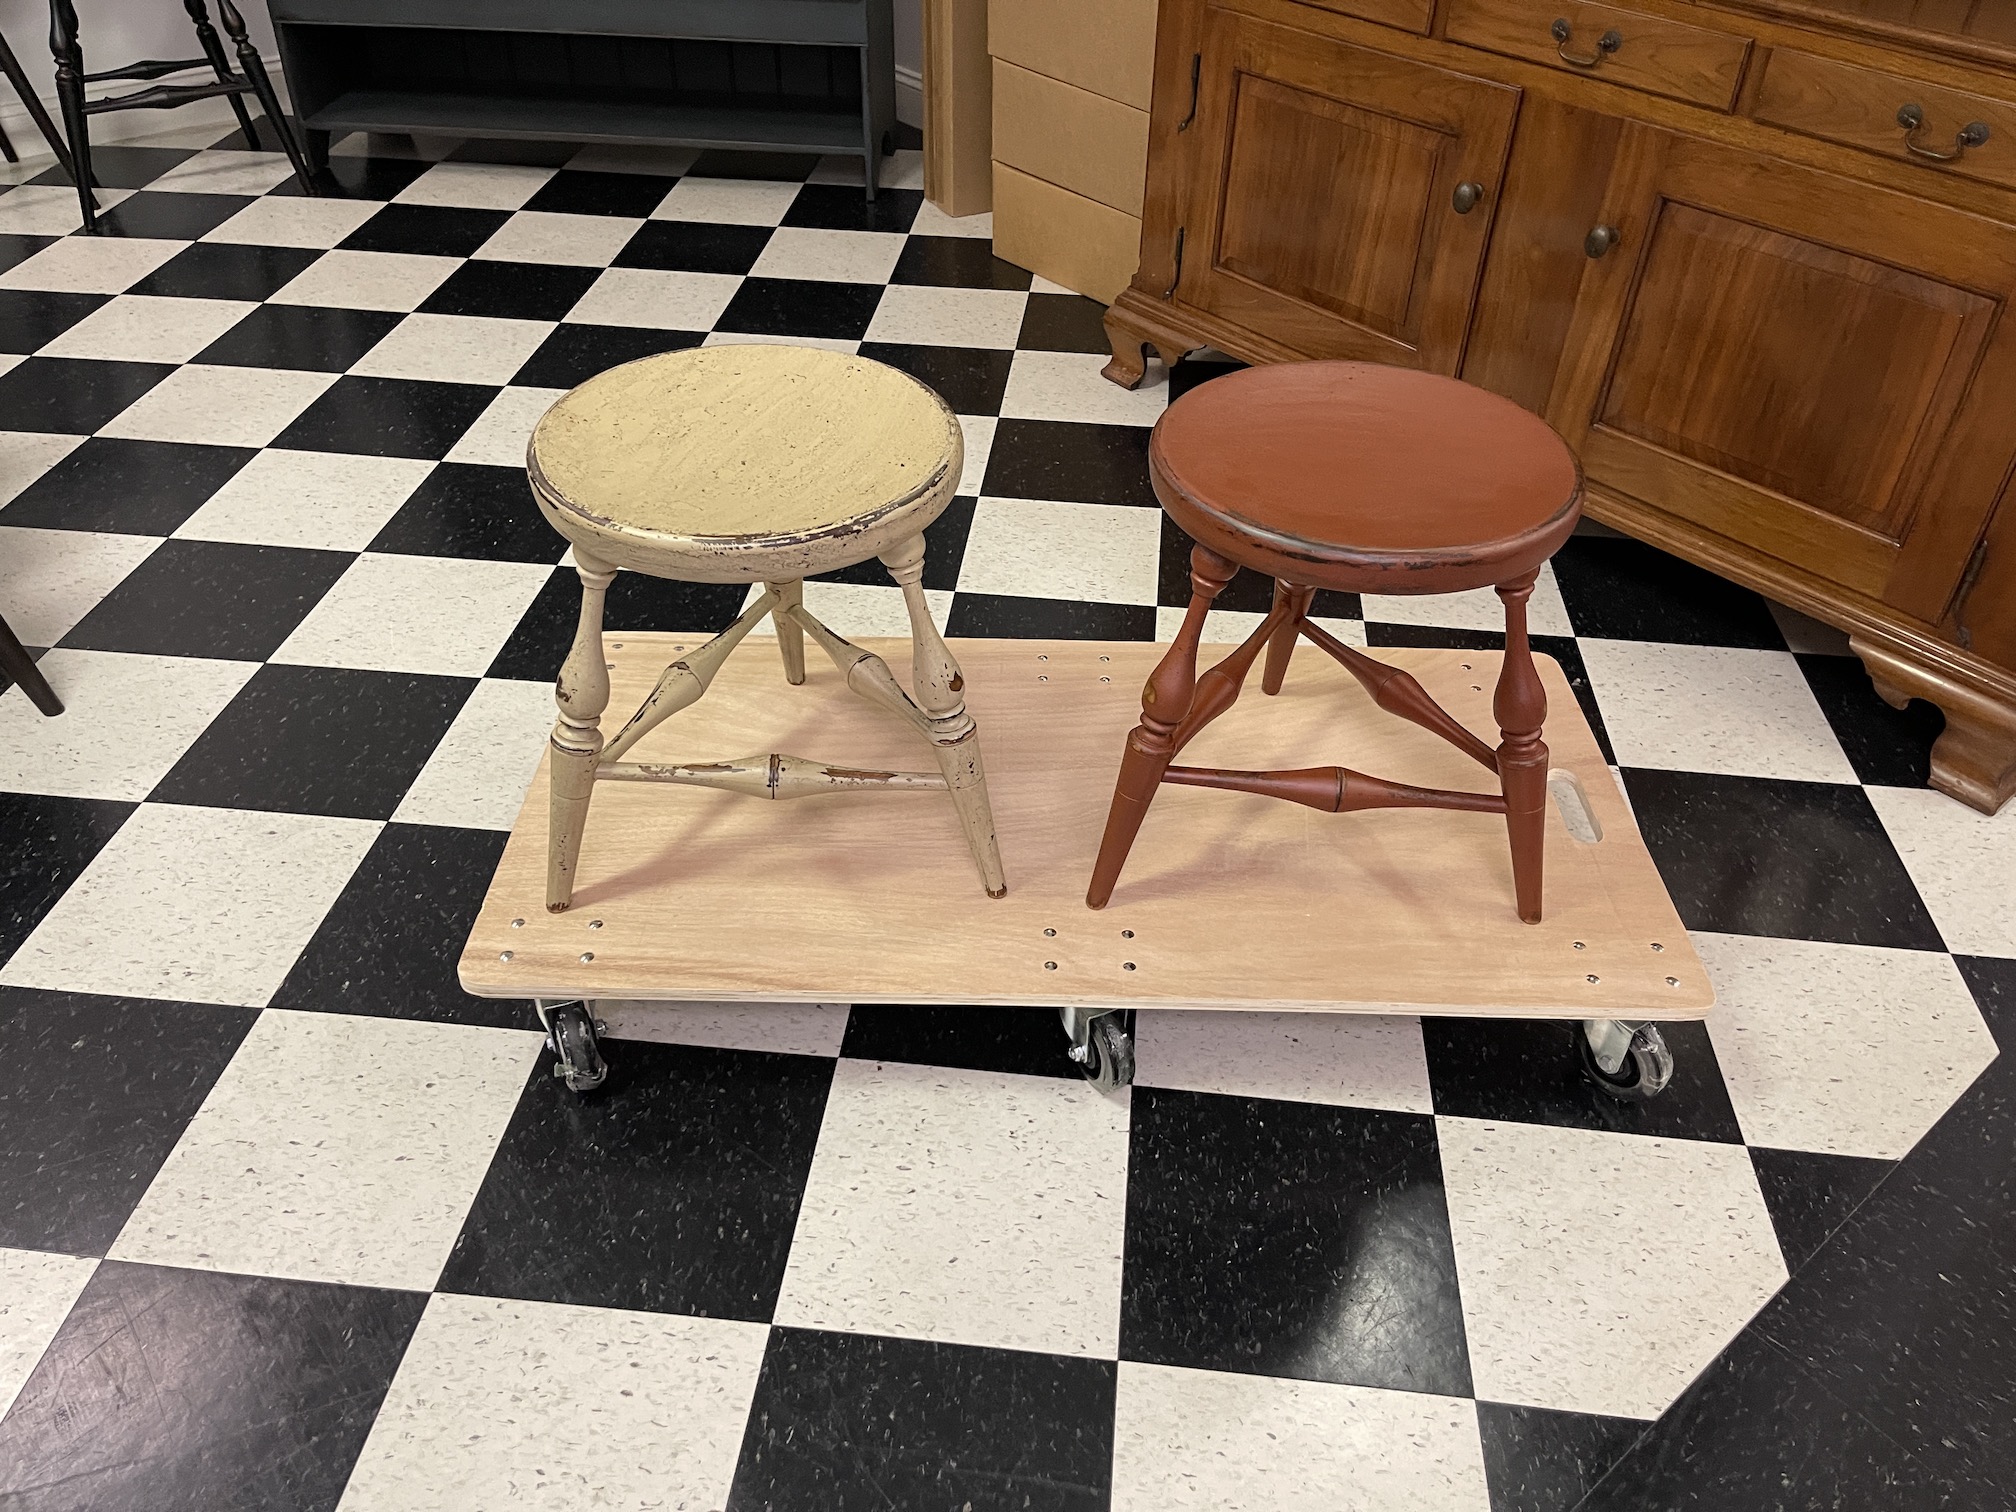 Pair of Farm Table Stools - Seat Height 18in Image